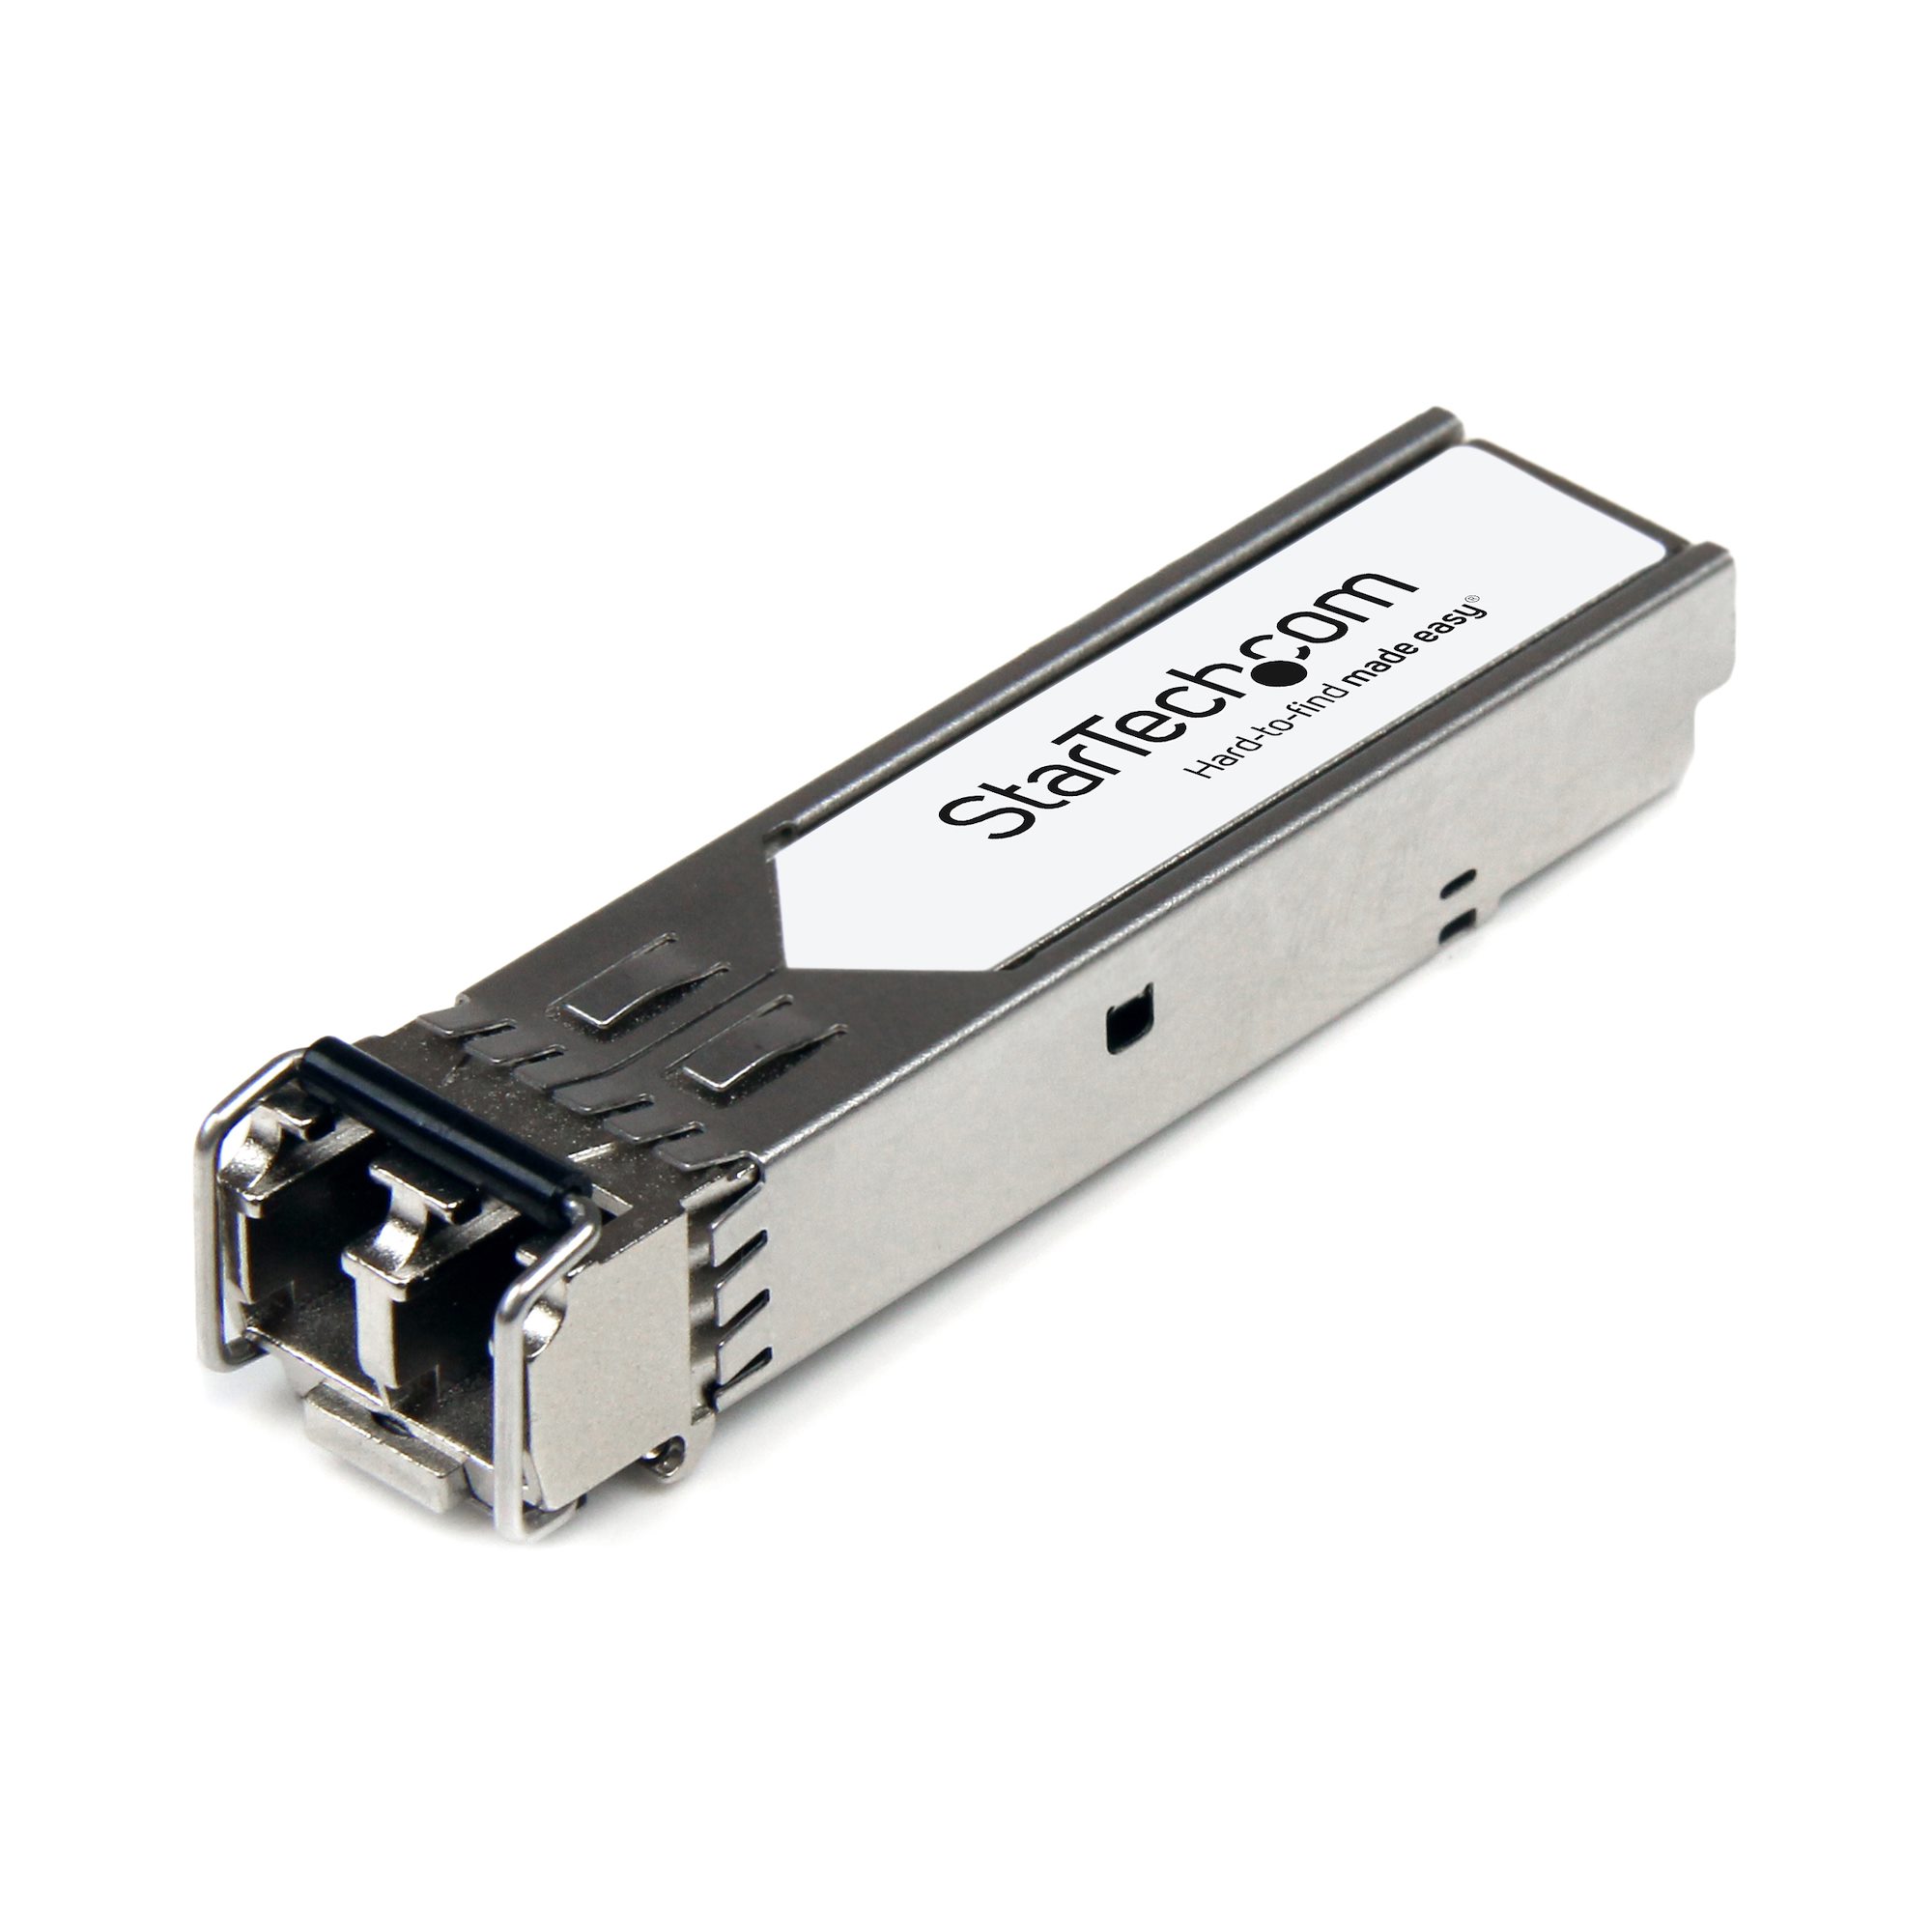 10G SFP Module LC Multimode Transceiver 10GBASE-SR for Arista SFP-10G-SR 850nm, 300M, with DDM 